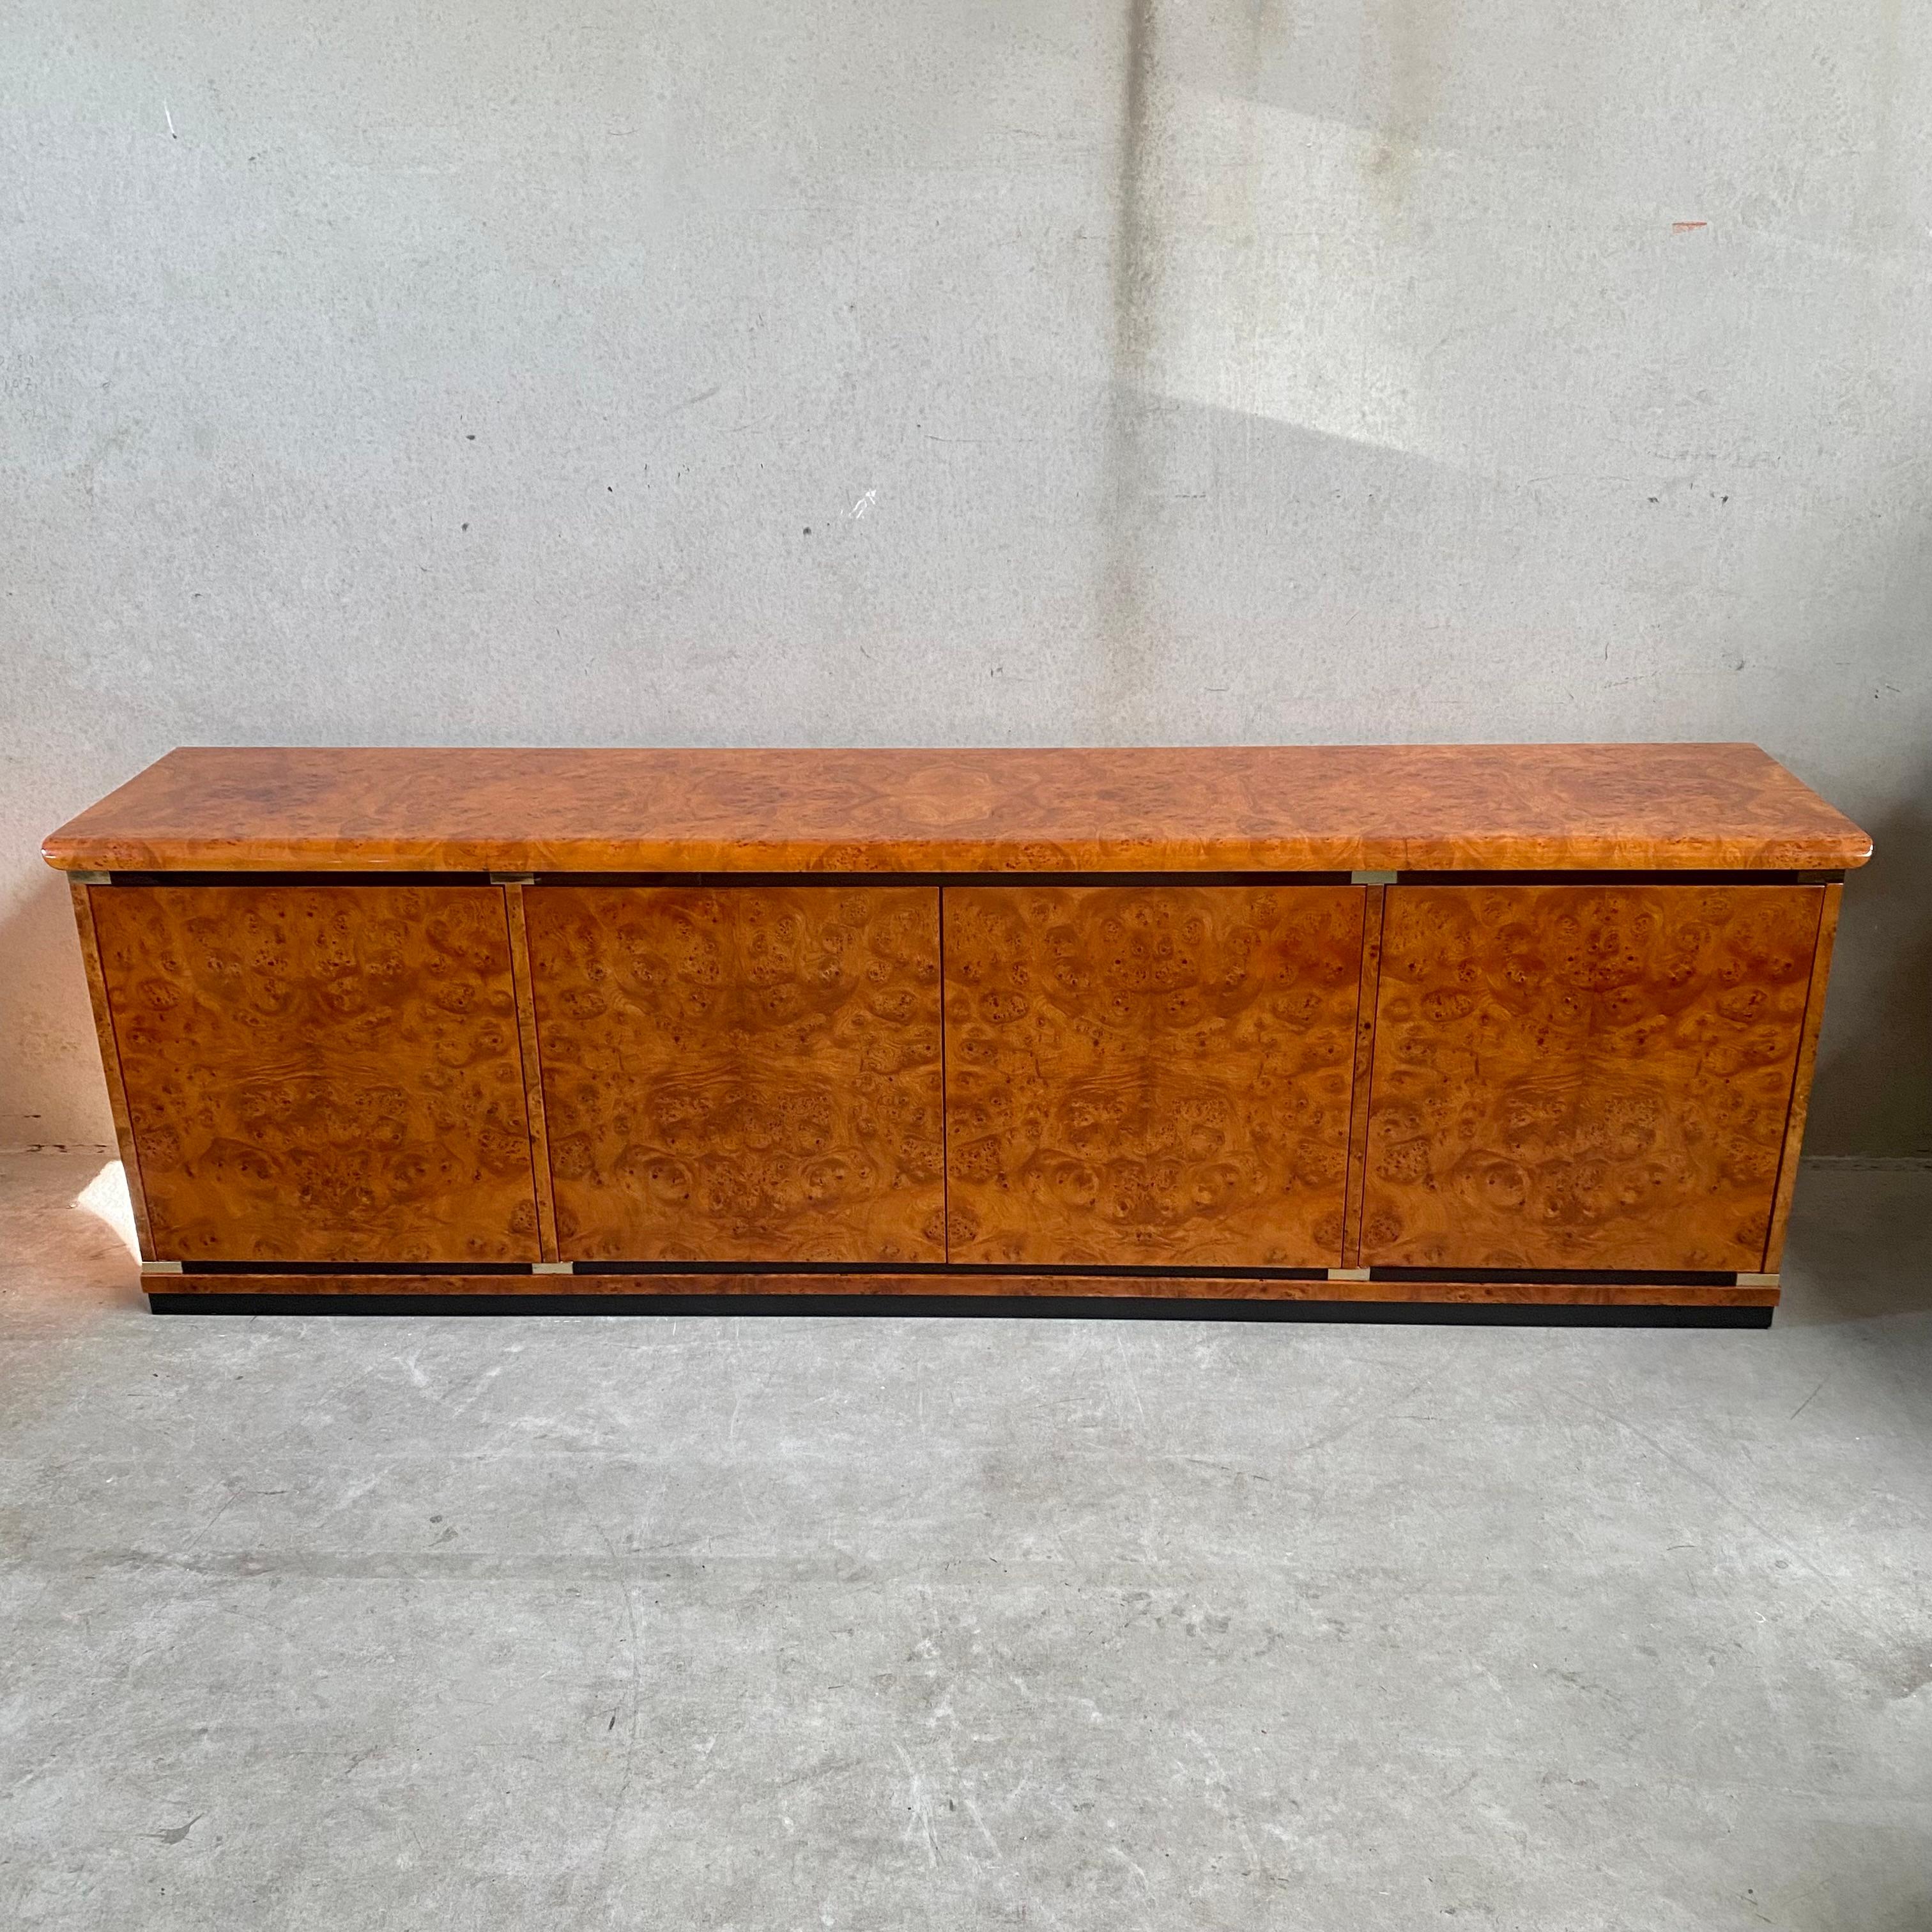 Briar Burl Wood Sideboard by Guerini Emilio for Gdm 24 Kt Gold Plated Italy 1980 For Sale 13